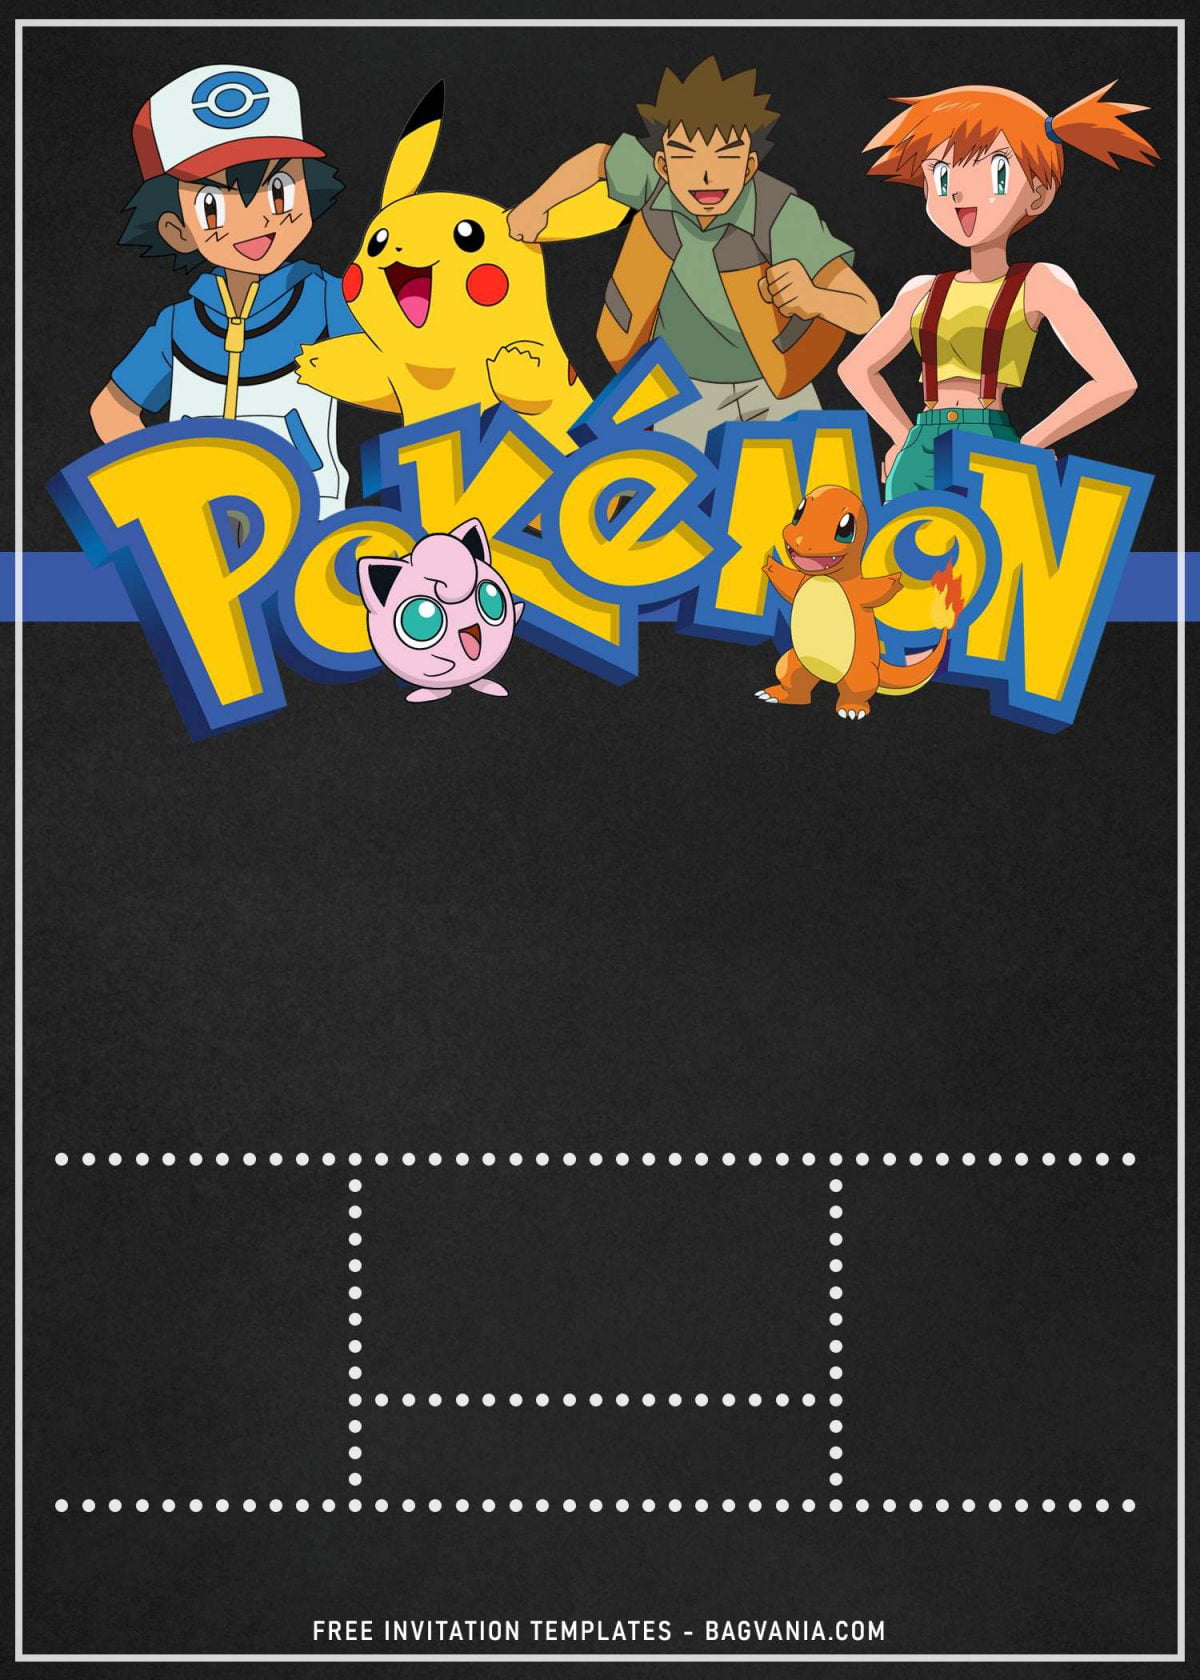 11+ Awesome Pokemon Chalkboard Invitation Templates For Boys Birthday Party and has Misty Ash And Brock